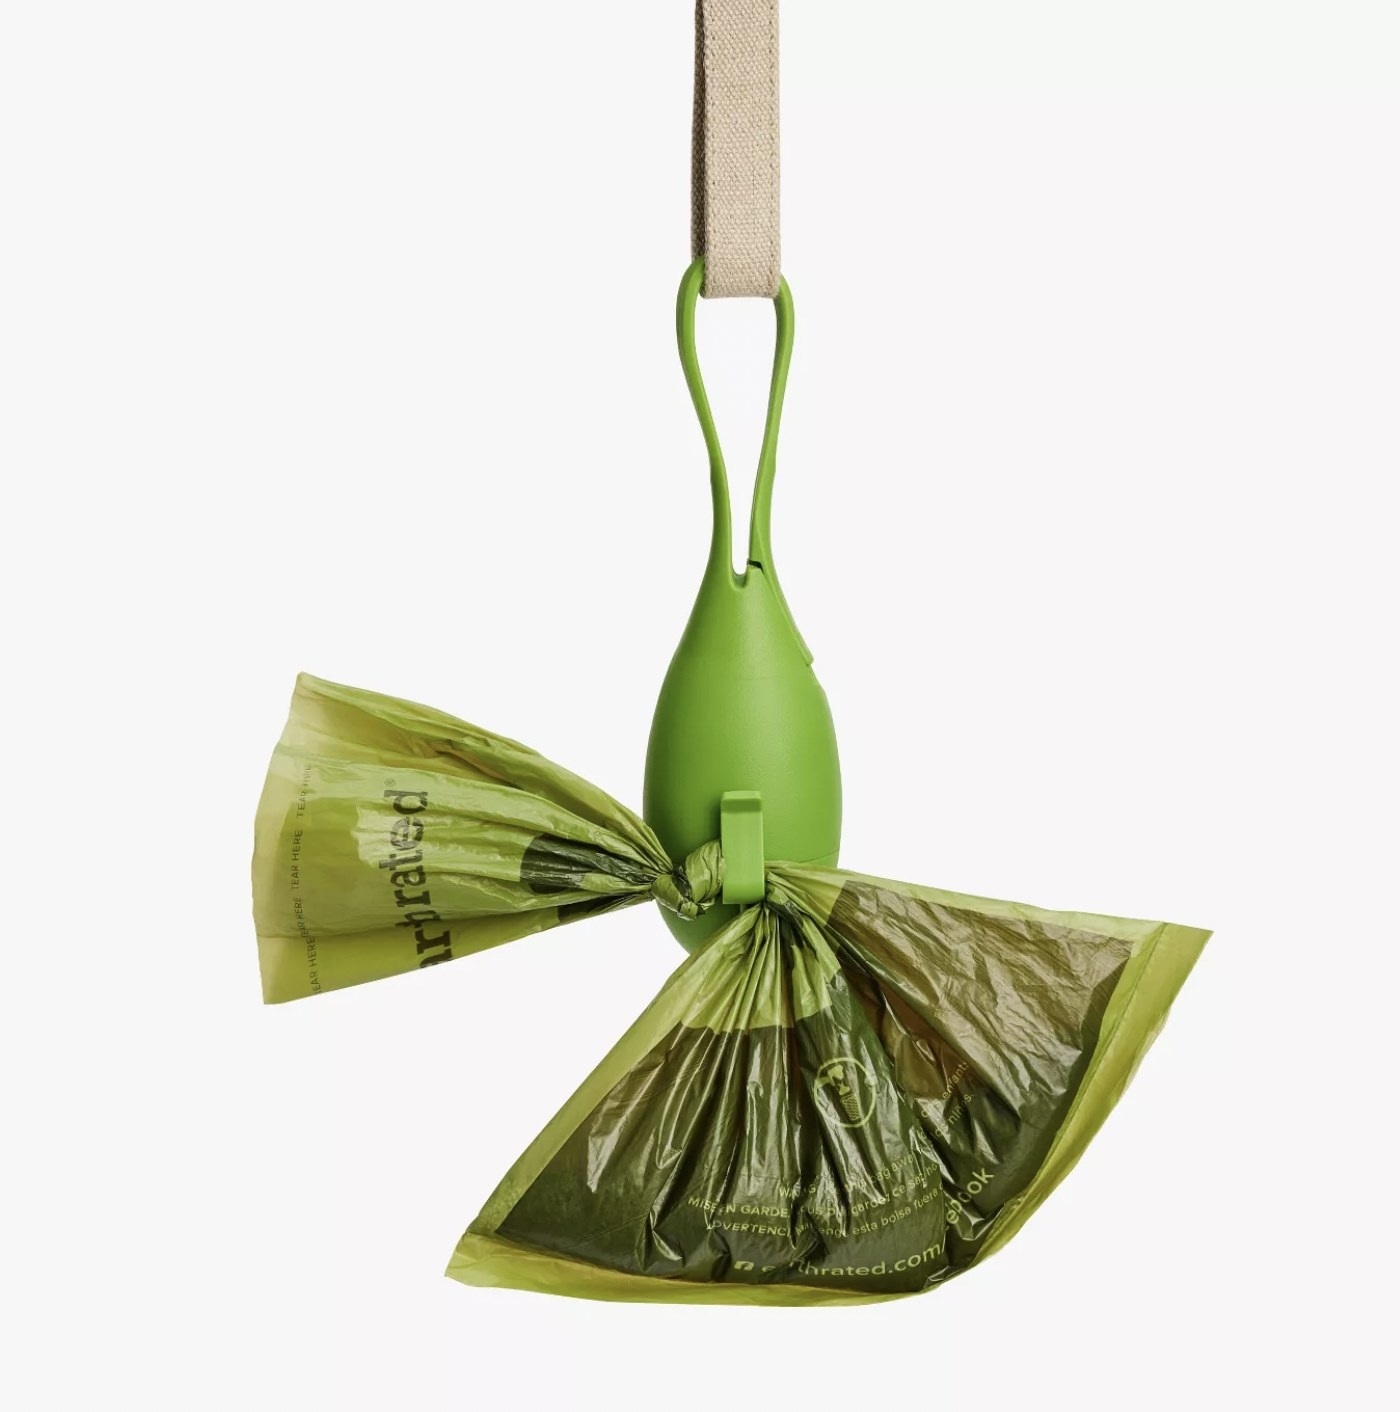 The green dispenser hanging off a leash with a filled poop bag attached to the hook on the dispenser